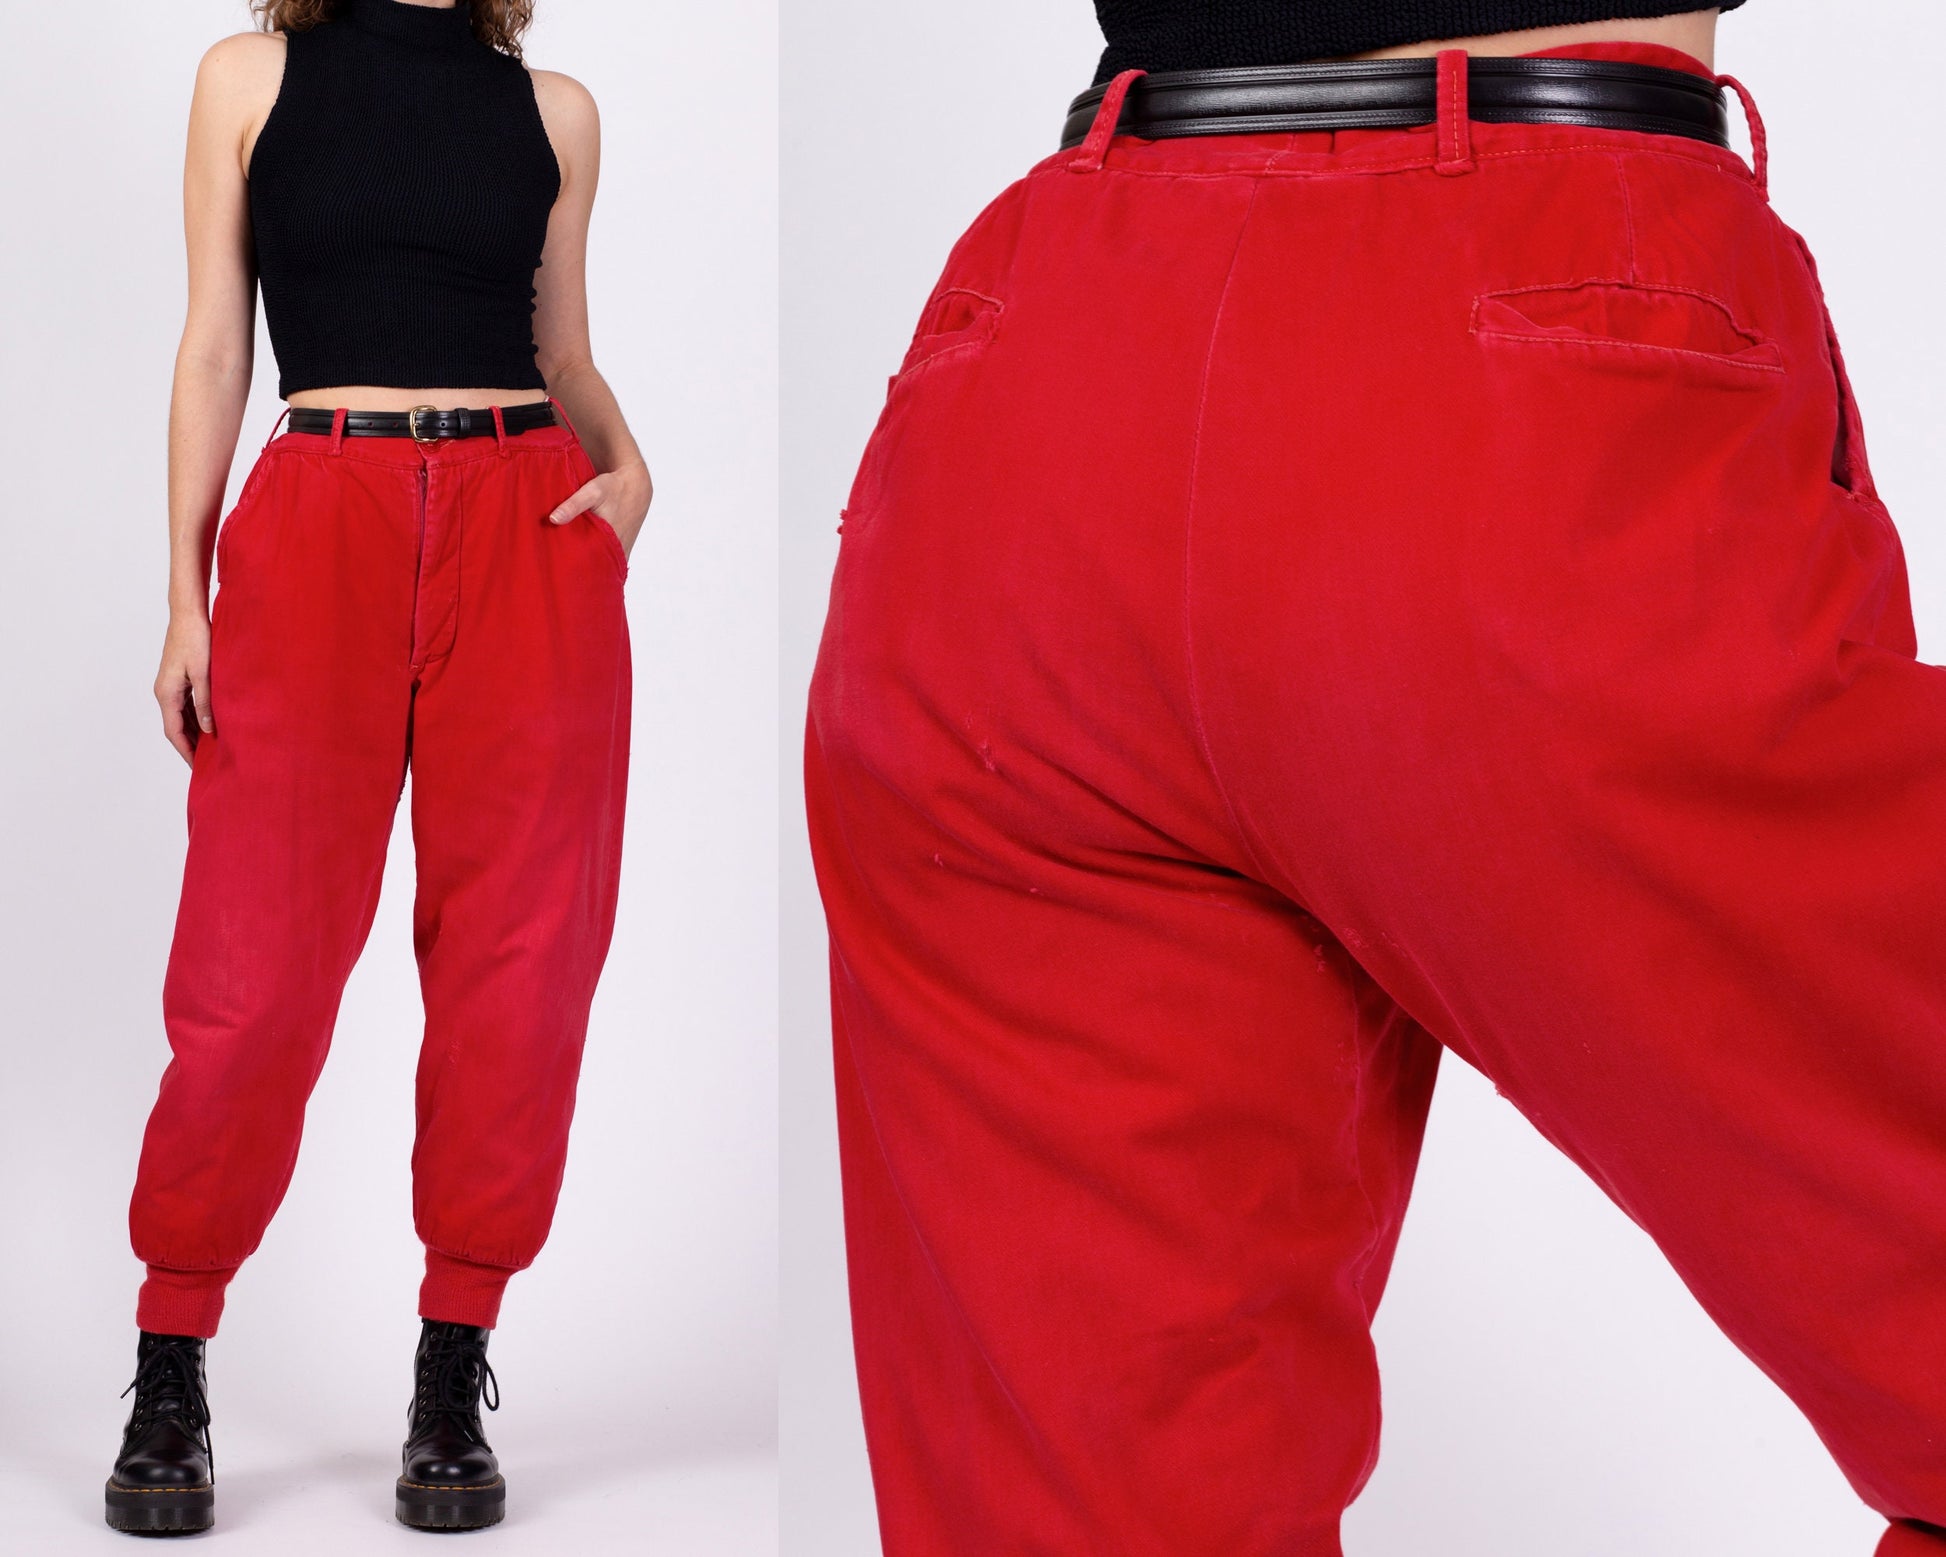 70s Red High Waisted Hunting Pants - Men's Medium, Women's Large, 31" 